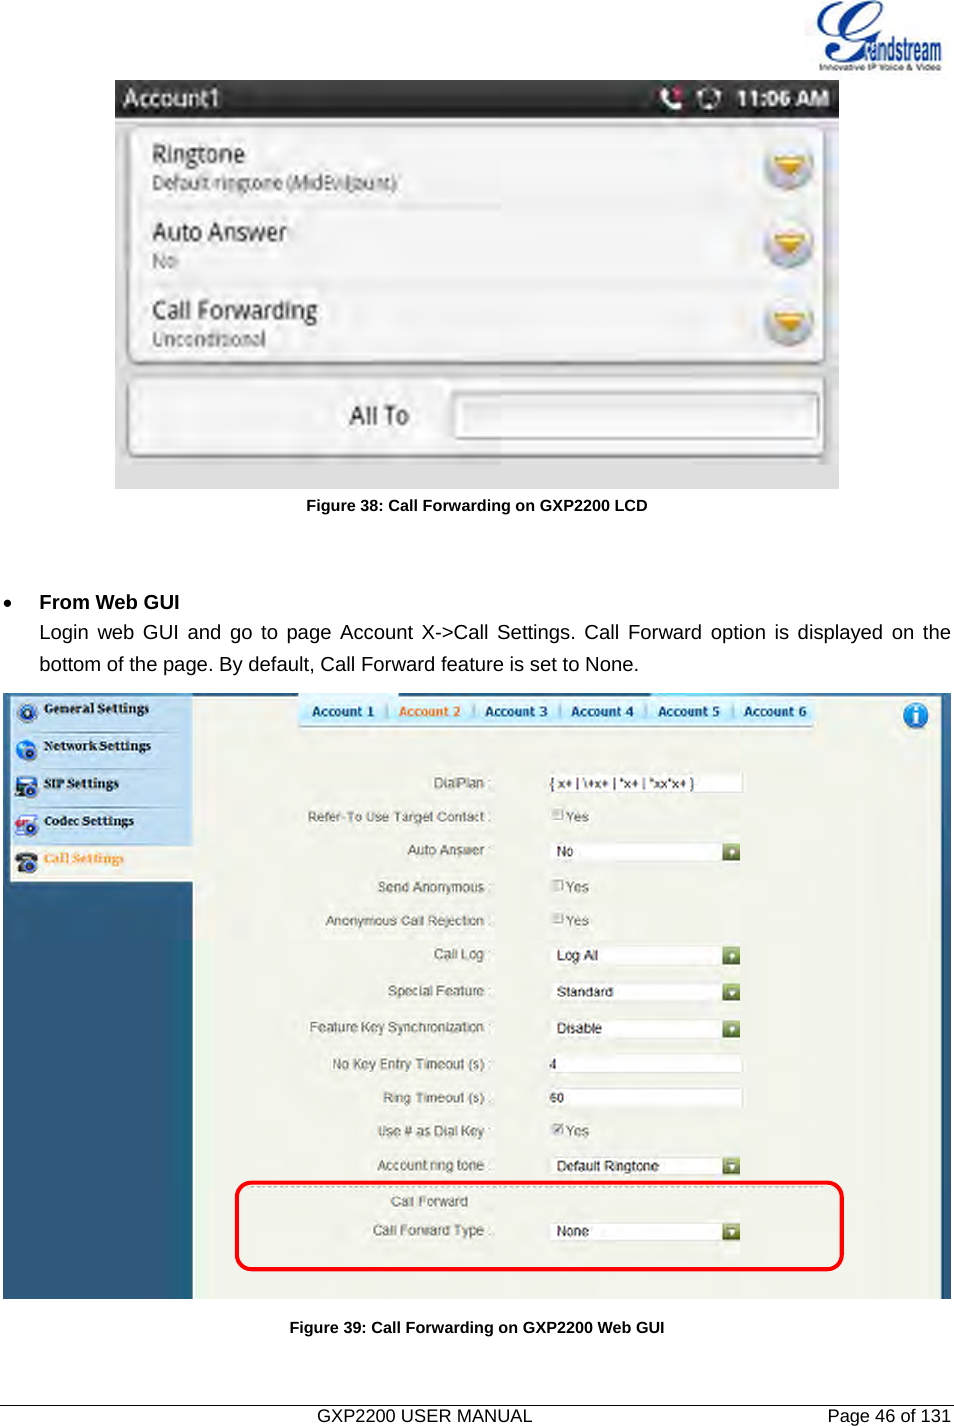   GXP2200 USER MANUAL       Page 46 of 131                                   Figure 38: Call Forwarding on GXP2200 LCD   • From Web GUI Login web GUI and go to page Account X-&gt;Call Settings. Call Forward option is displayed on the bottom of the page. By default, Call Forward feature is set to None.  Figure 39: Call Forwarding on GXP2200 Web GUI  